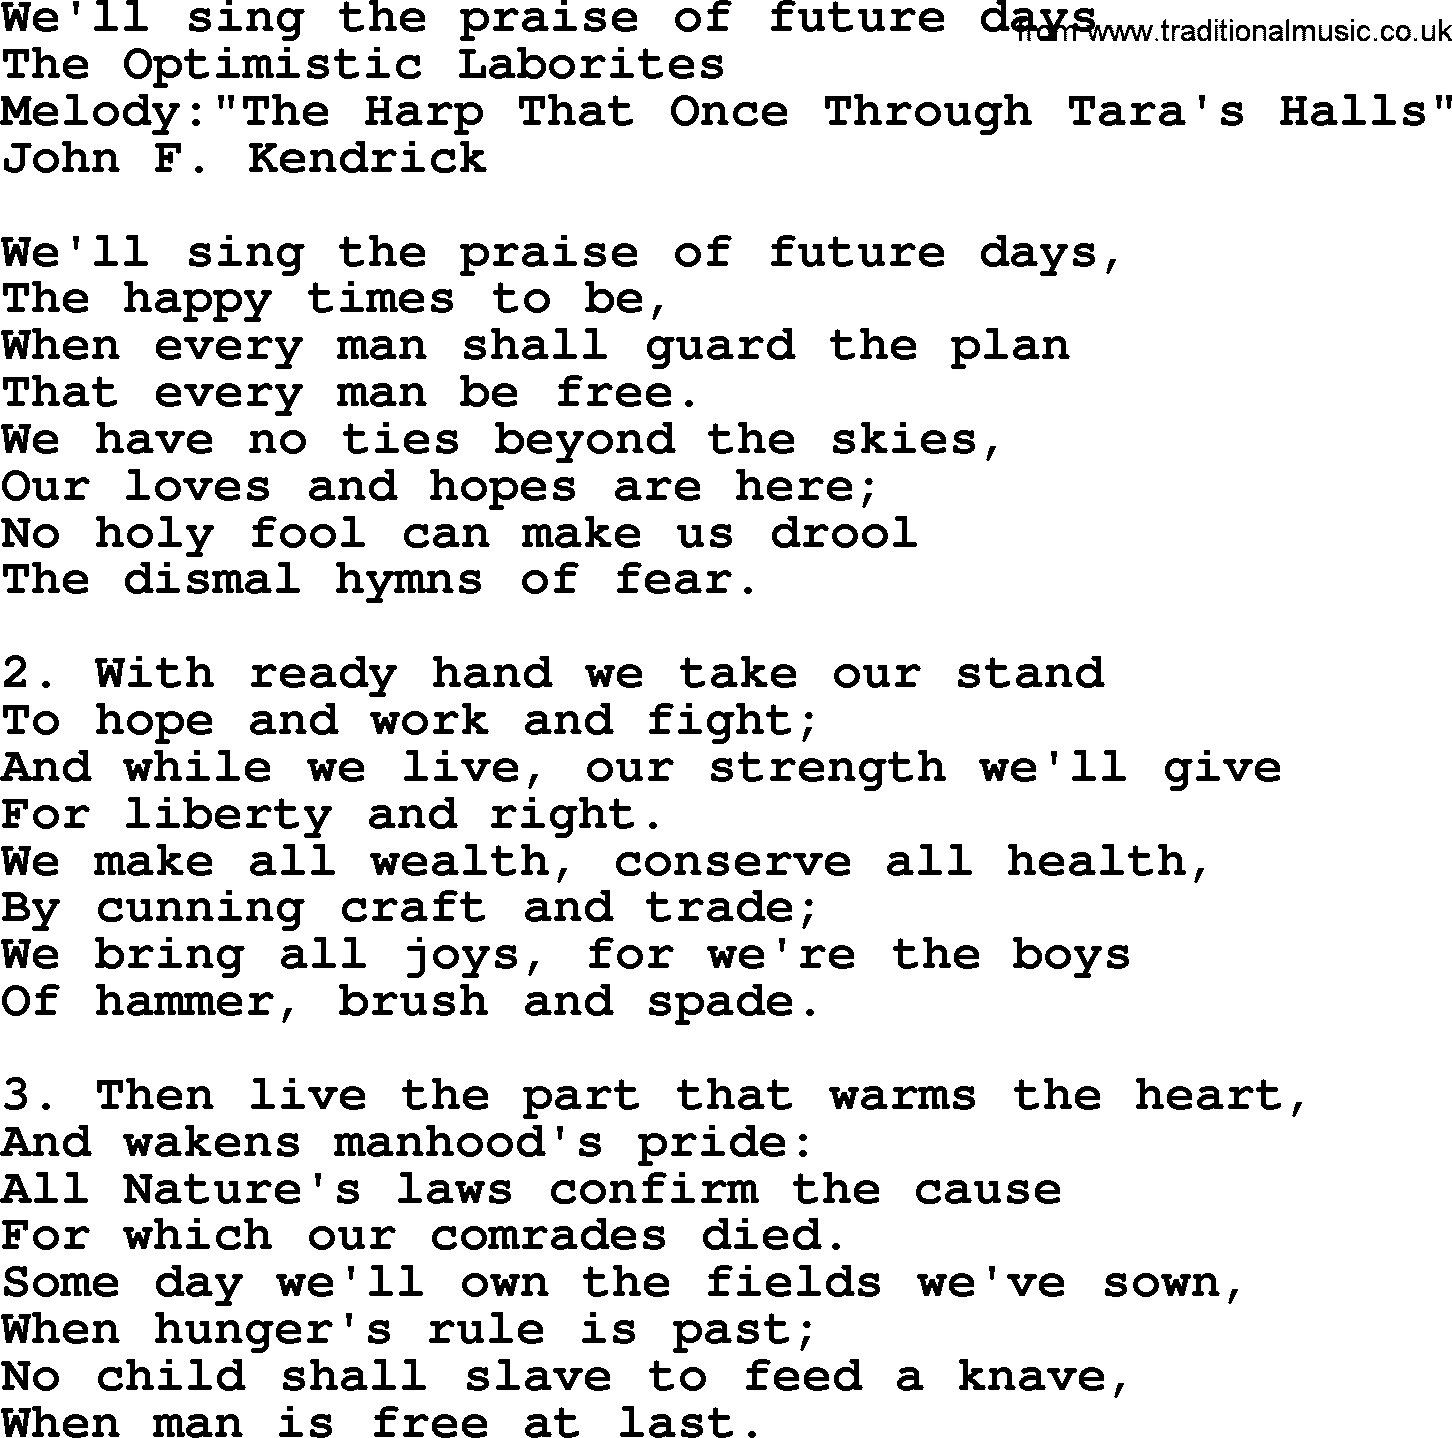 Political, Solidarity, Workers or Union song: Well Sing The Praise Of Future Days, lyrics